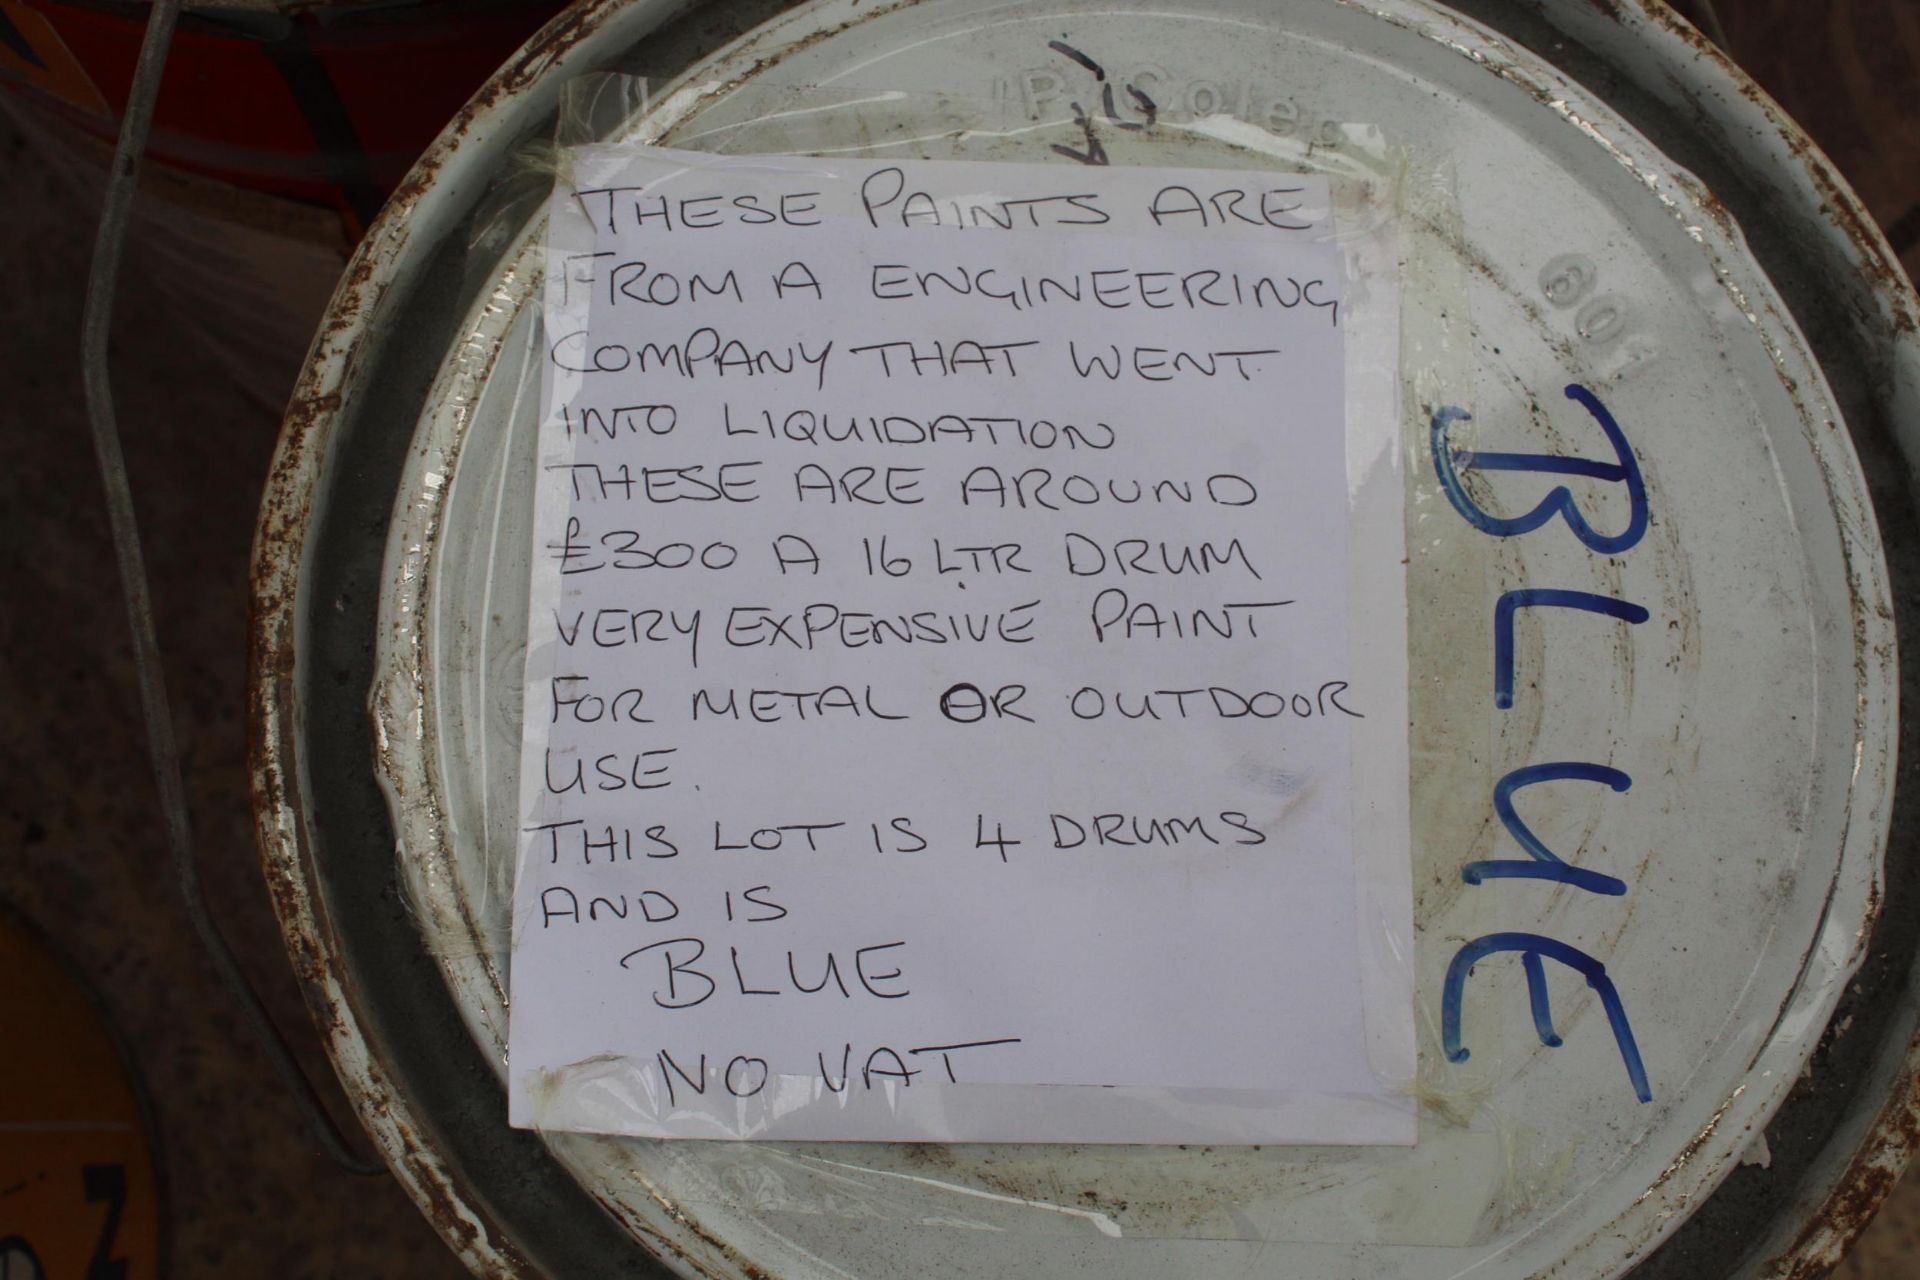 4 BLUE METAL 16 LTR DRUMS AND OUTDOOR PAINT NO VAT - Image 2 of 2